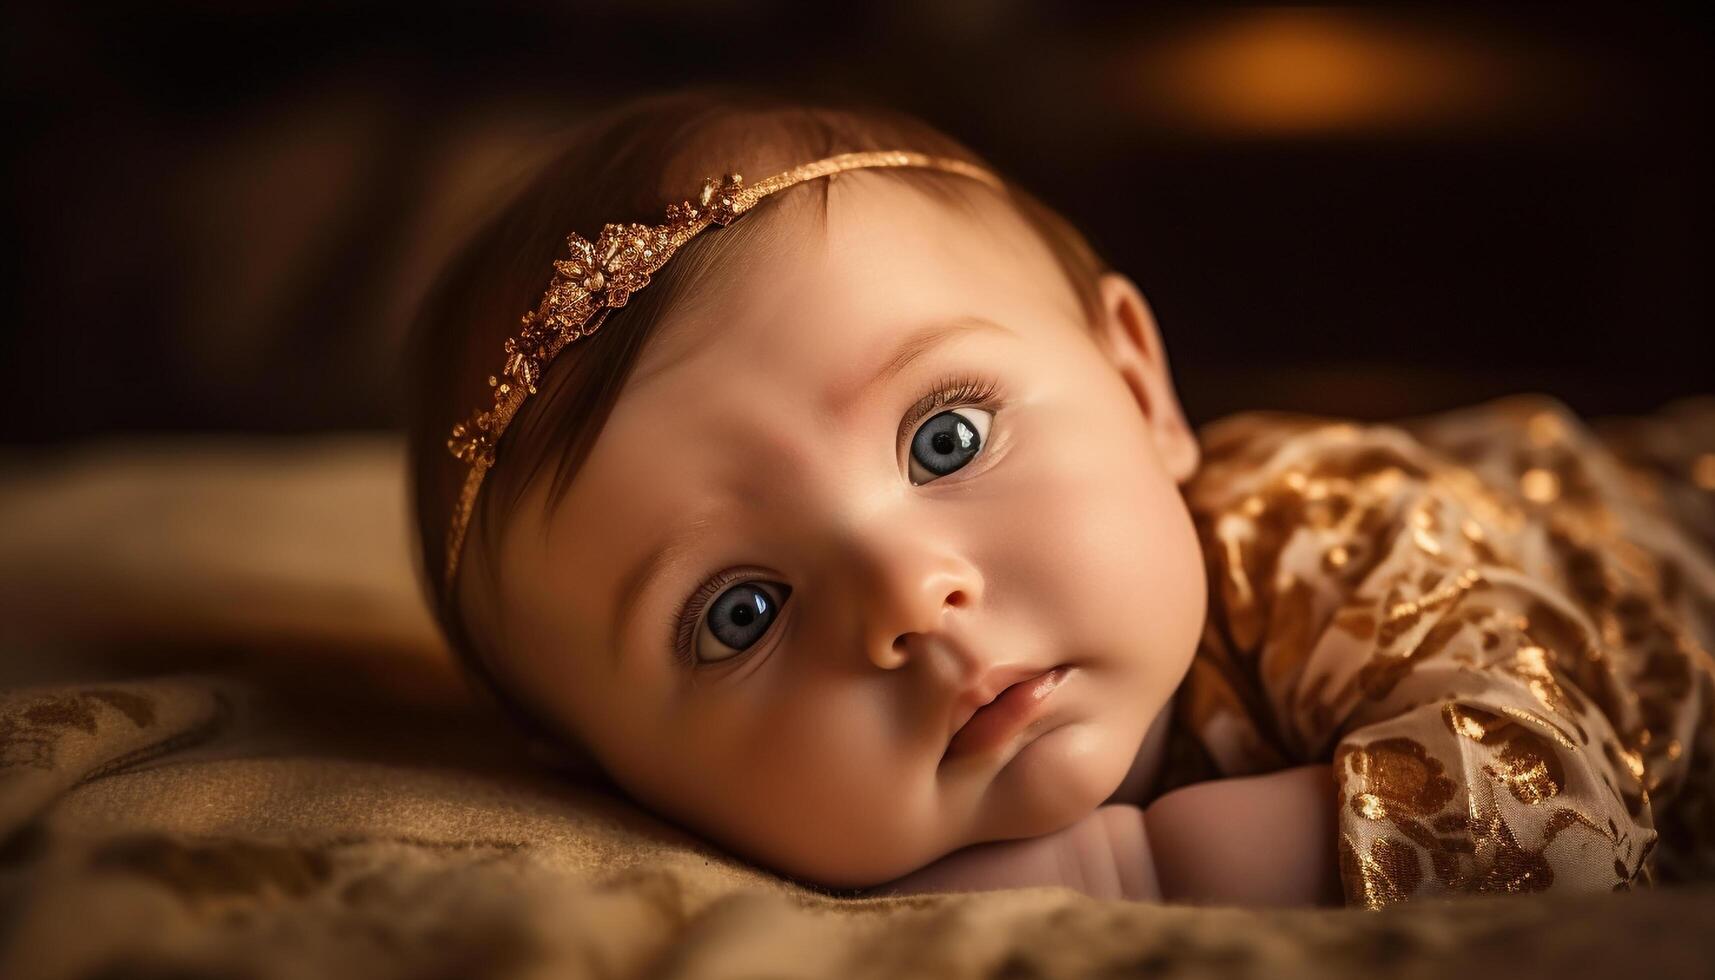 Cute baby boy and girl, innocence and joy in portrait generated by AI photo